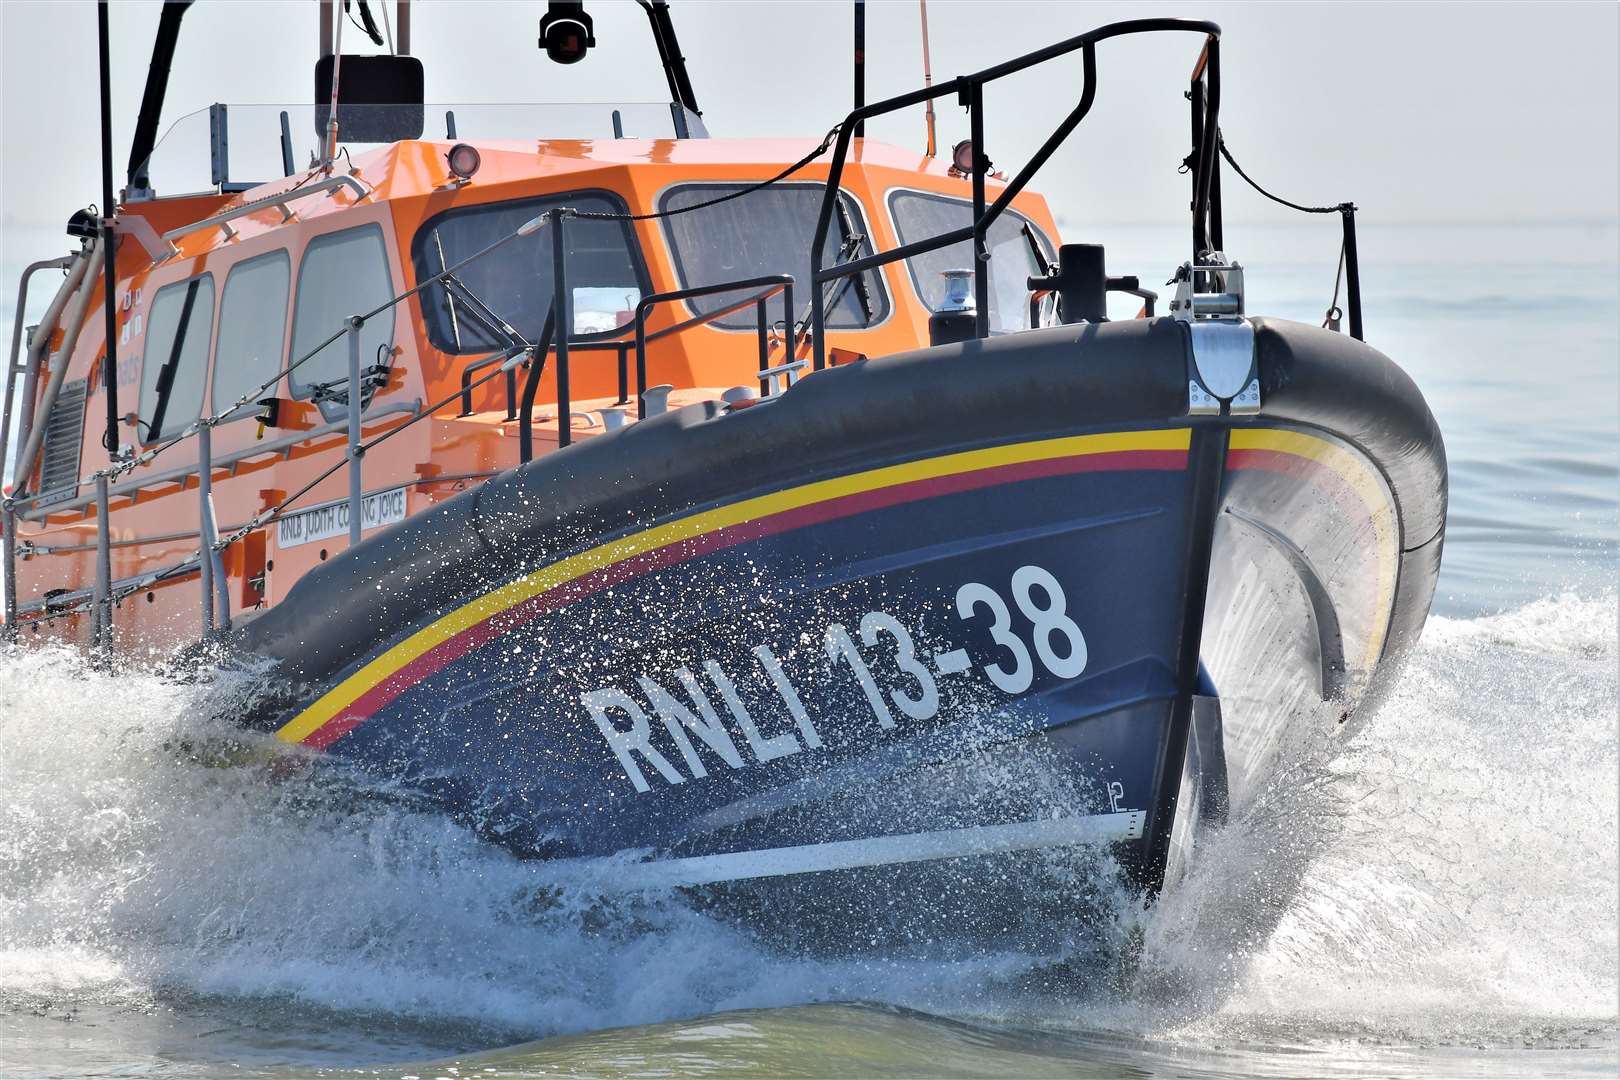 The RNLI's £2.2m Shannon-class lifeboat Judith Copping Joyce in action off Sheppey. Picture: RNLI/Vic Booth